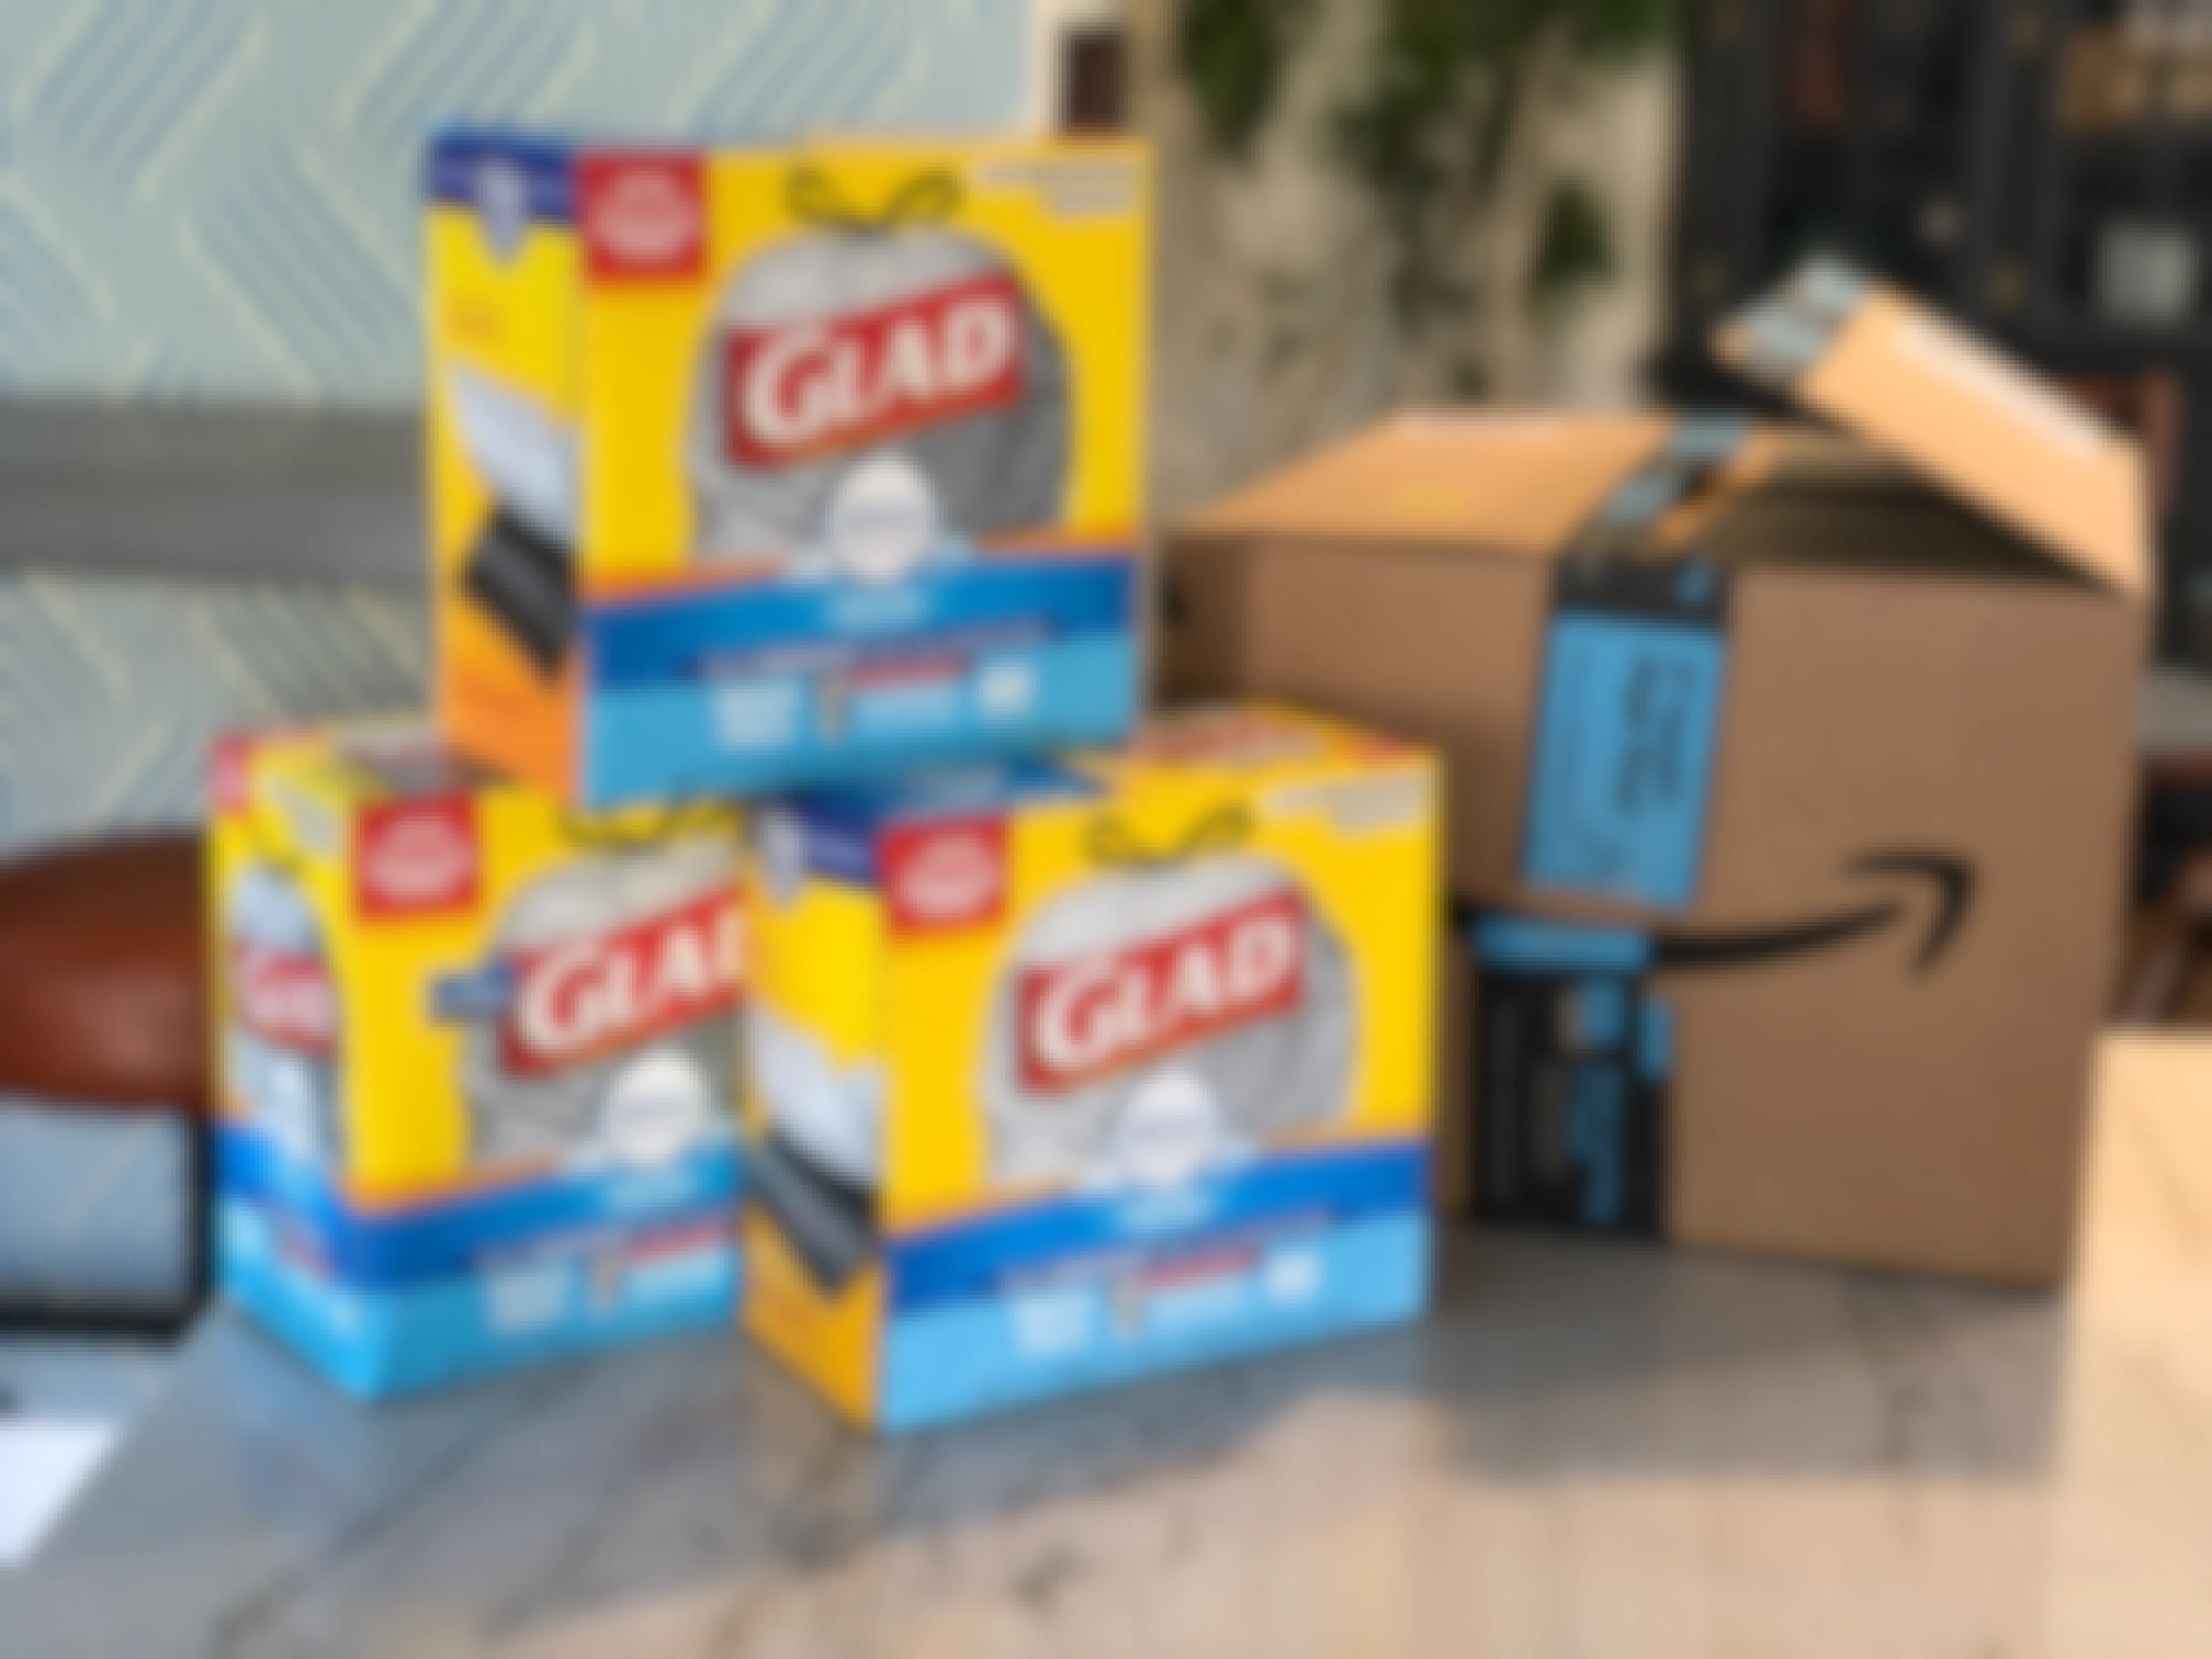 Three boxes of Glad trash bags stacked on a counter next to an Amazon box.